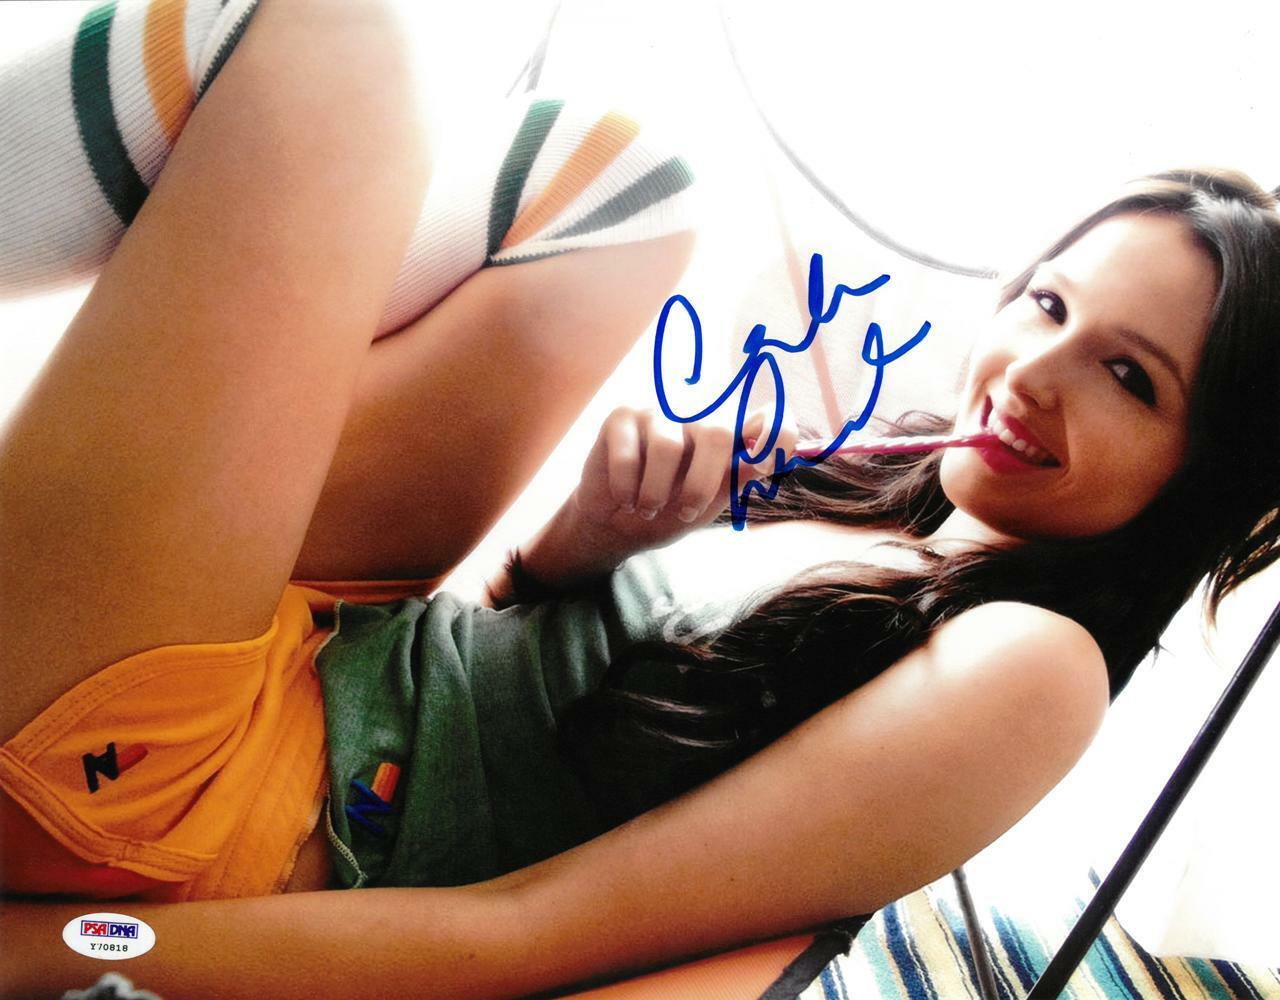 Camilla Luddington Signed Authentic Autographed 11x14 Photo Poster painting PSA/DNA #Y70818